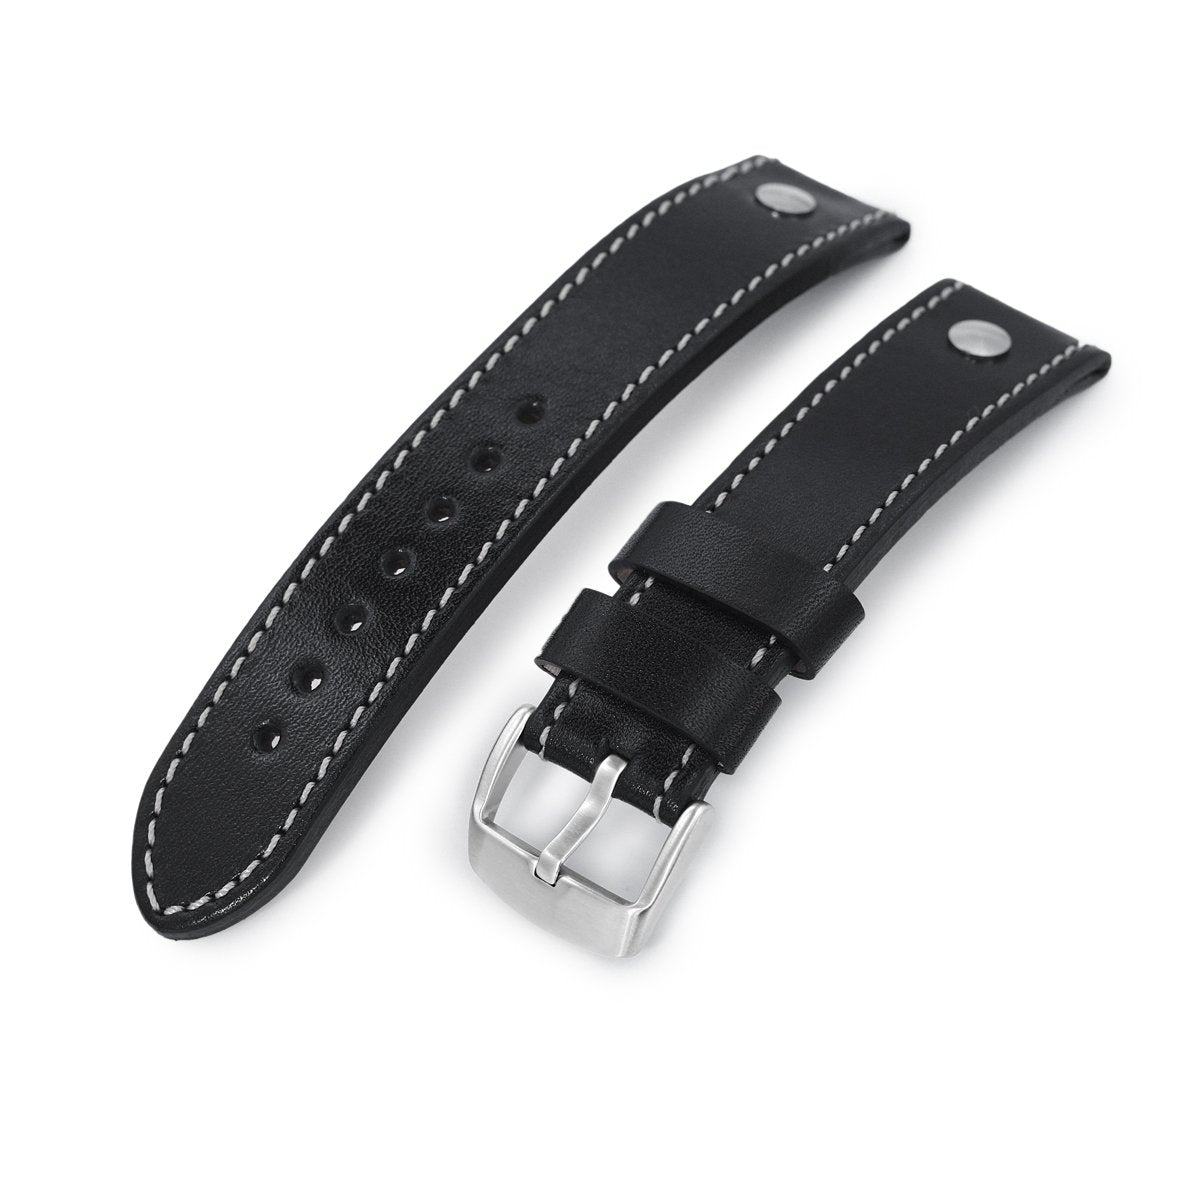 German made 22mm Sturdy Semi-gloss Black Saddle Leather with Rivet Watch Band Brushed Strapcode Watch Bands